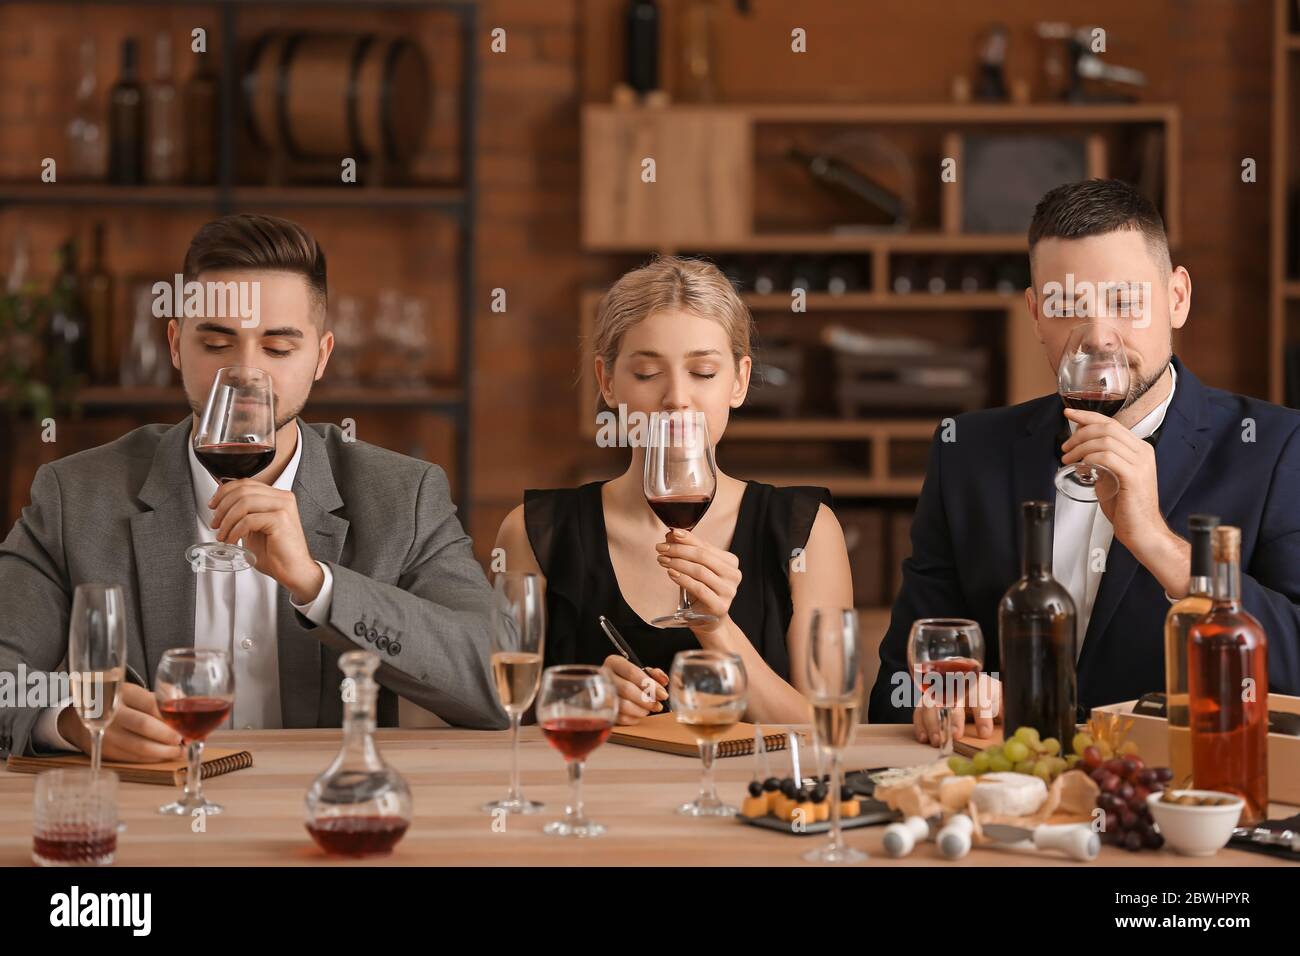 People tasting wine at the restaurant Stock Photo